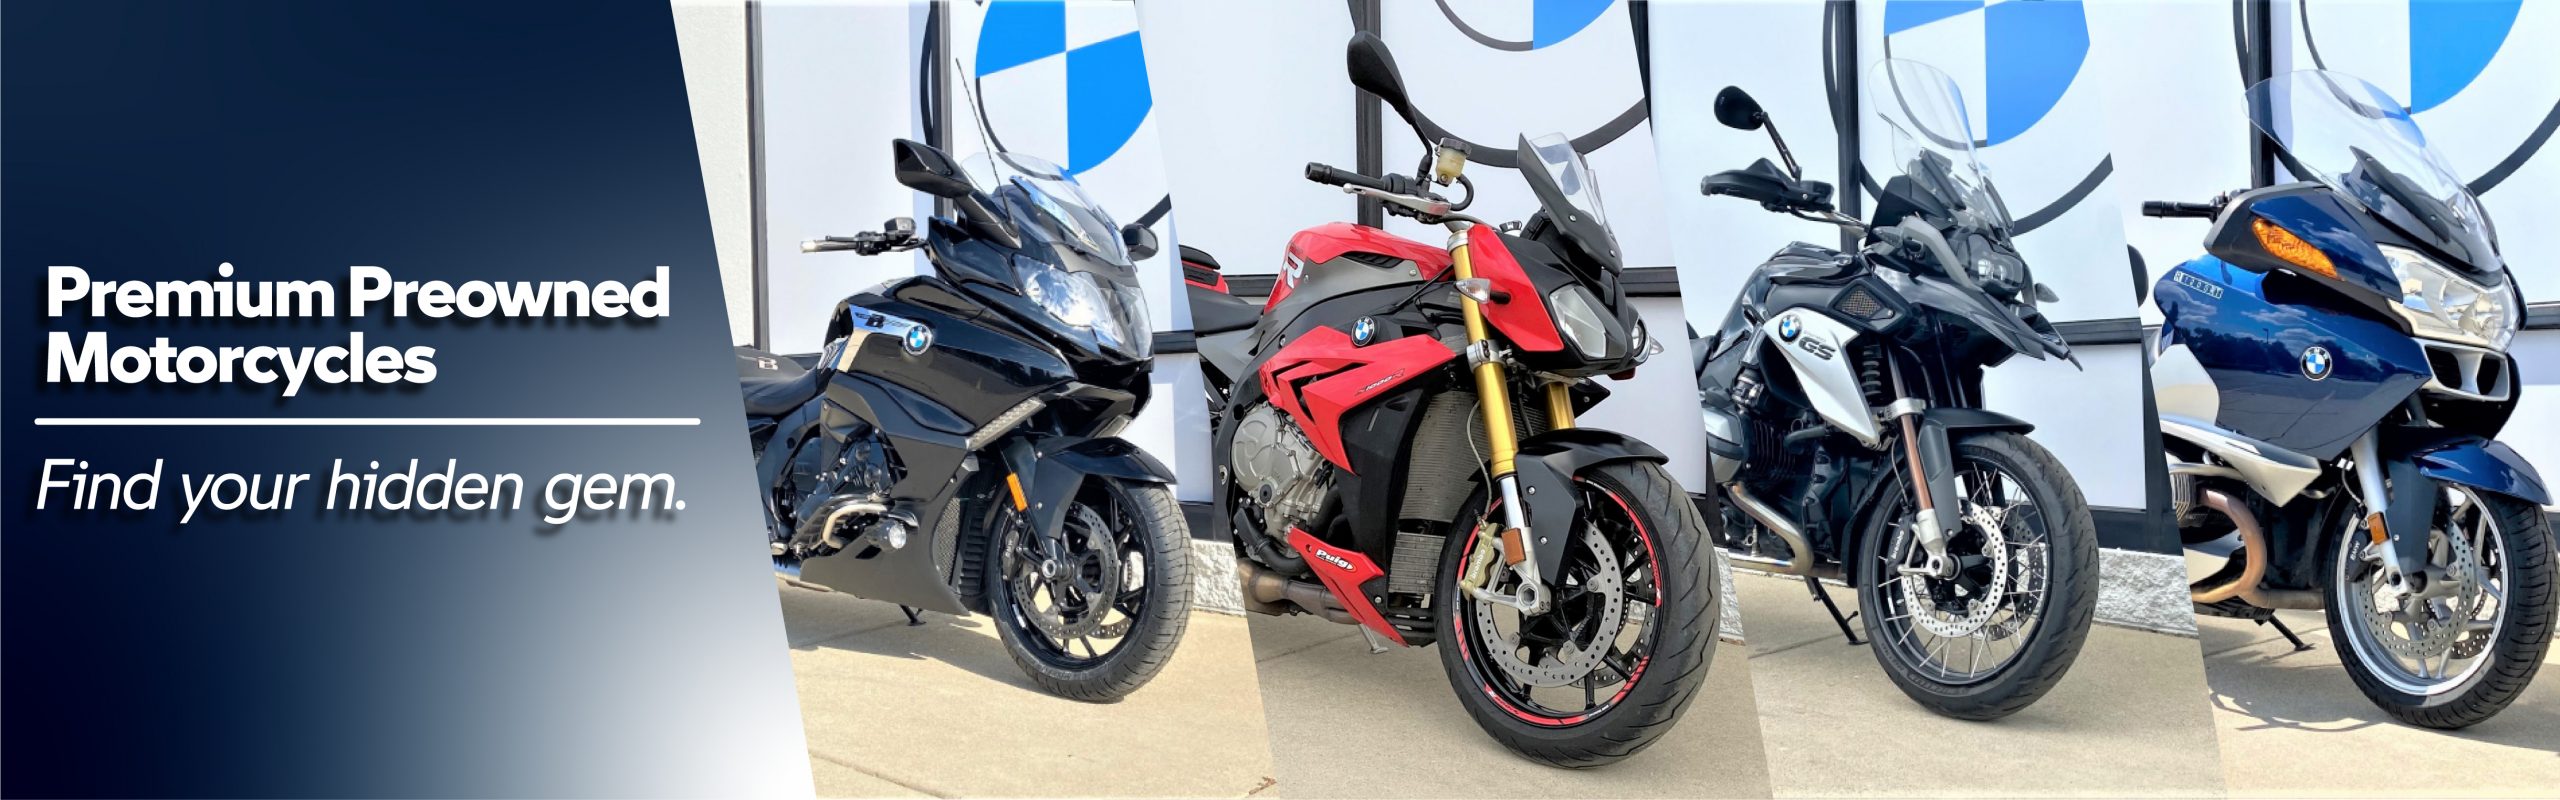 Largest BMW Motorcycle Dealership in Detroit and Southeast Michigan